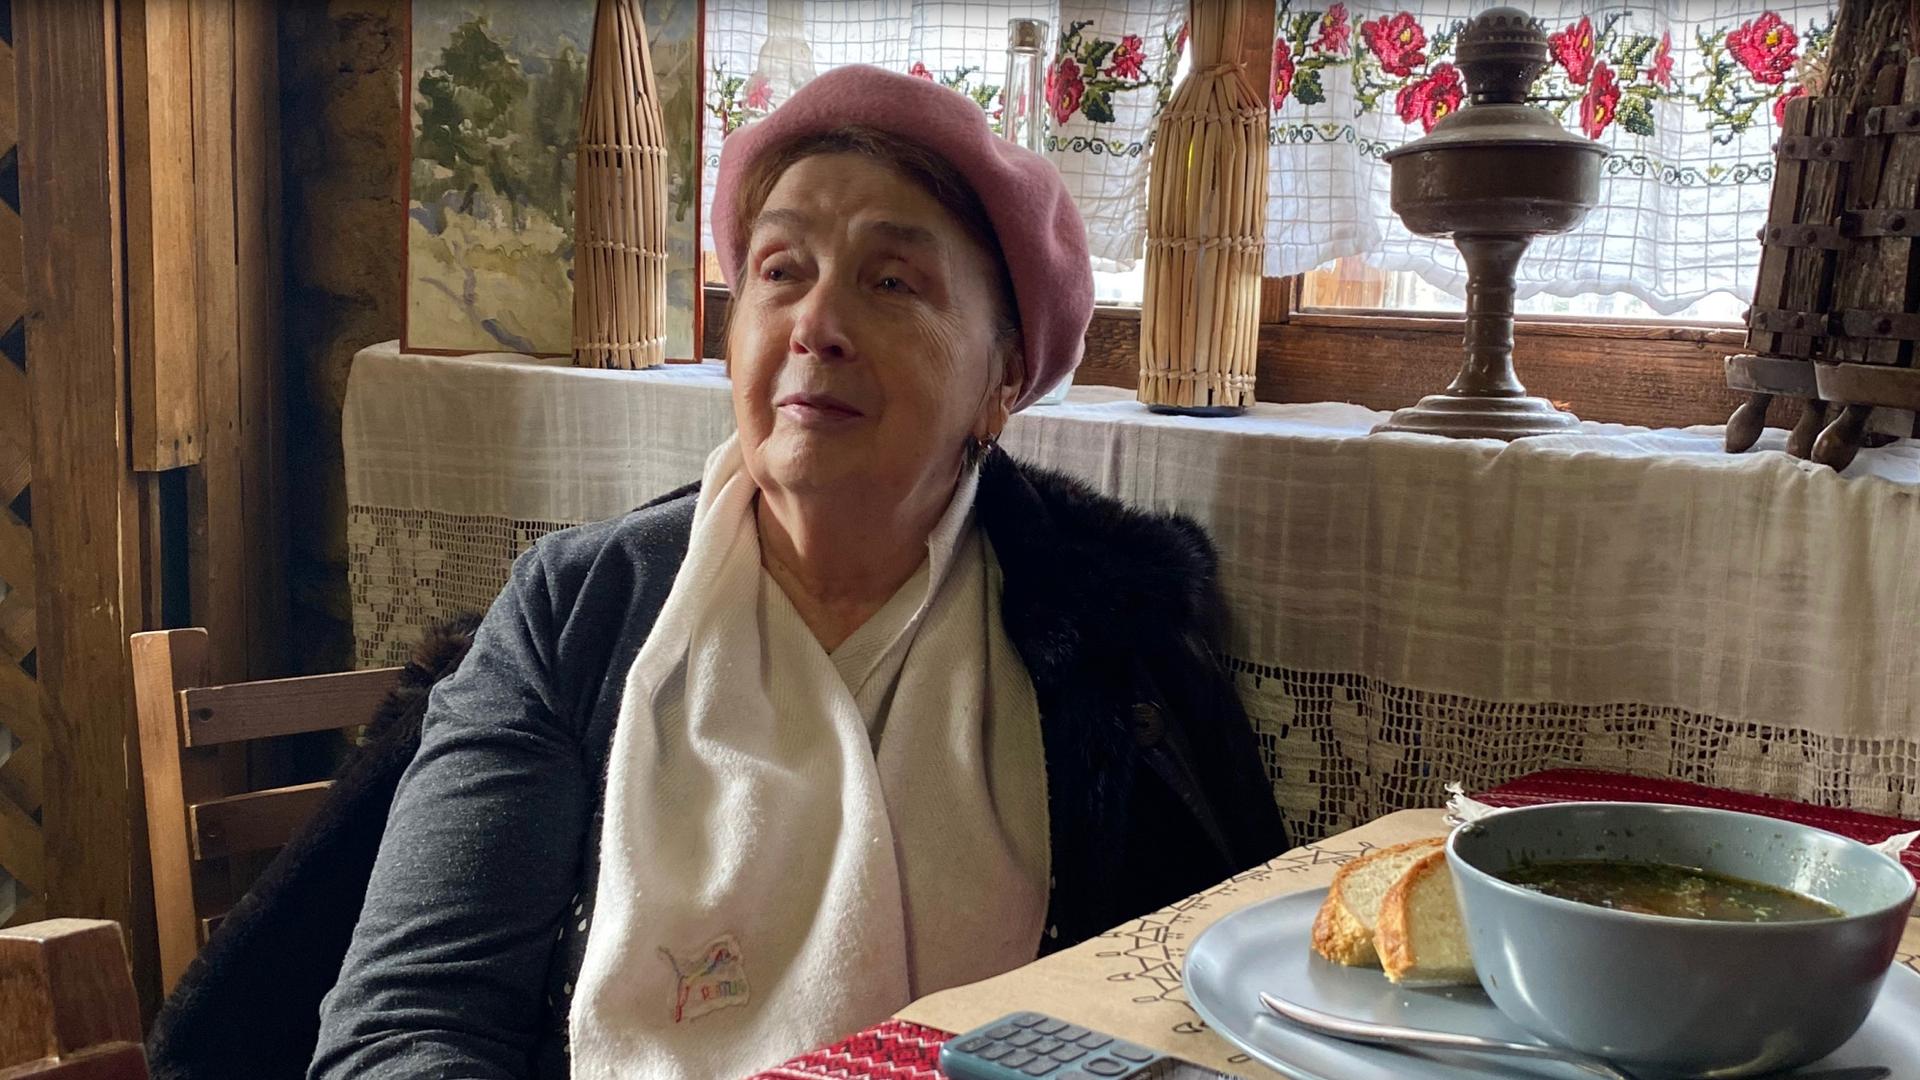 Natalya, a 70-year-old retired epidemiologist from Odessa, has lunch at the Asconi Winery near Chisinau, in Moldova, where she is being hosted for free. 